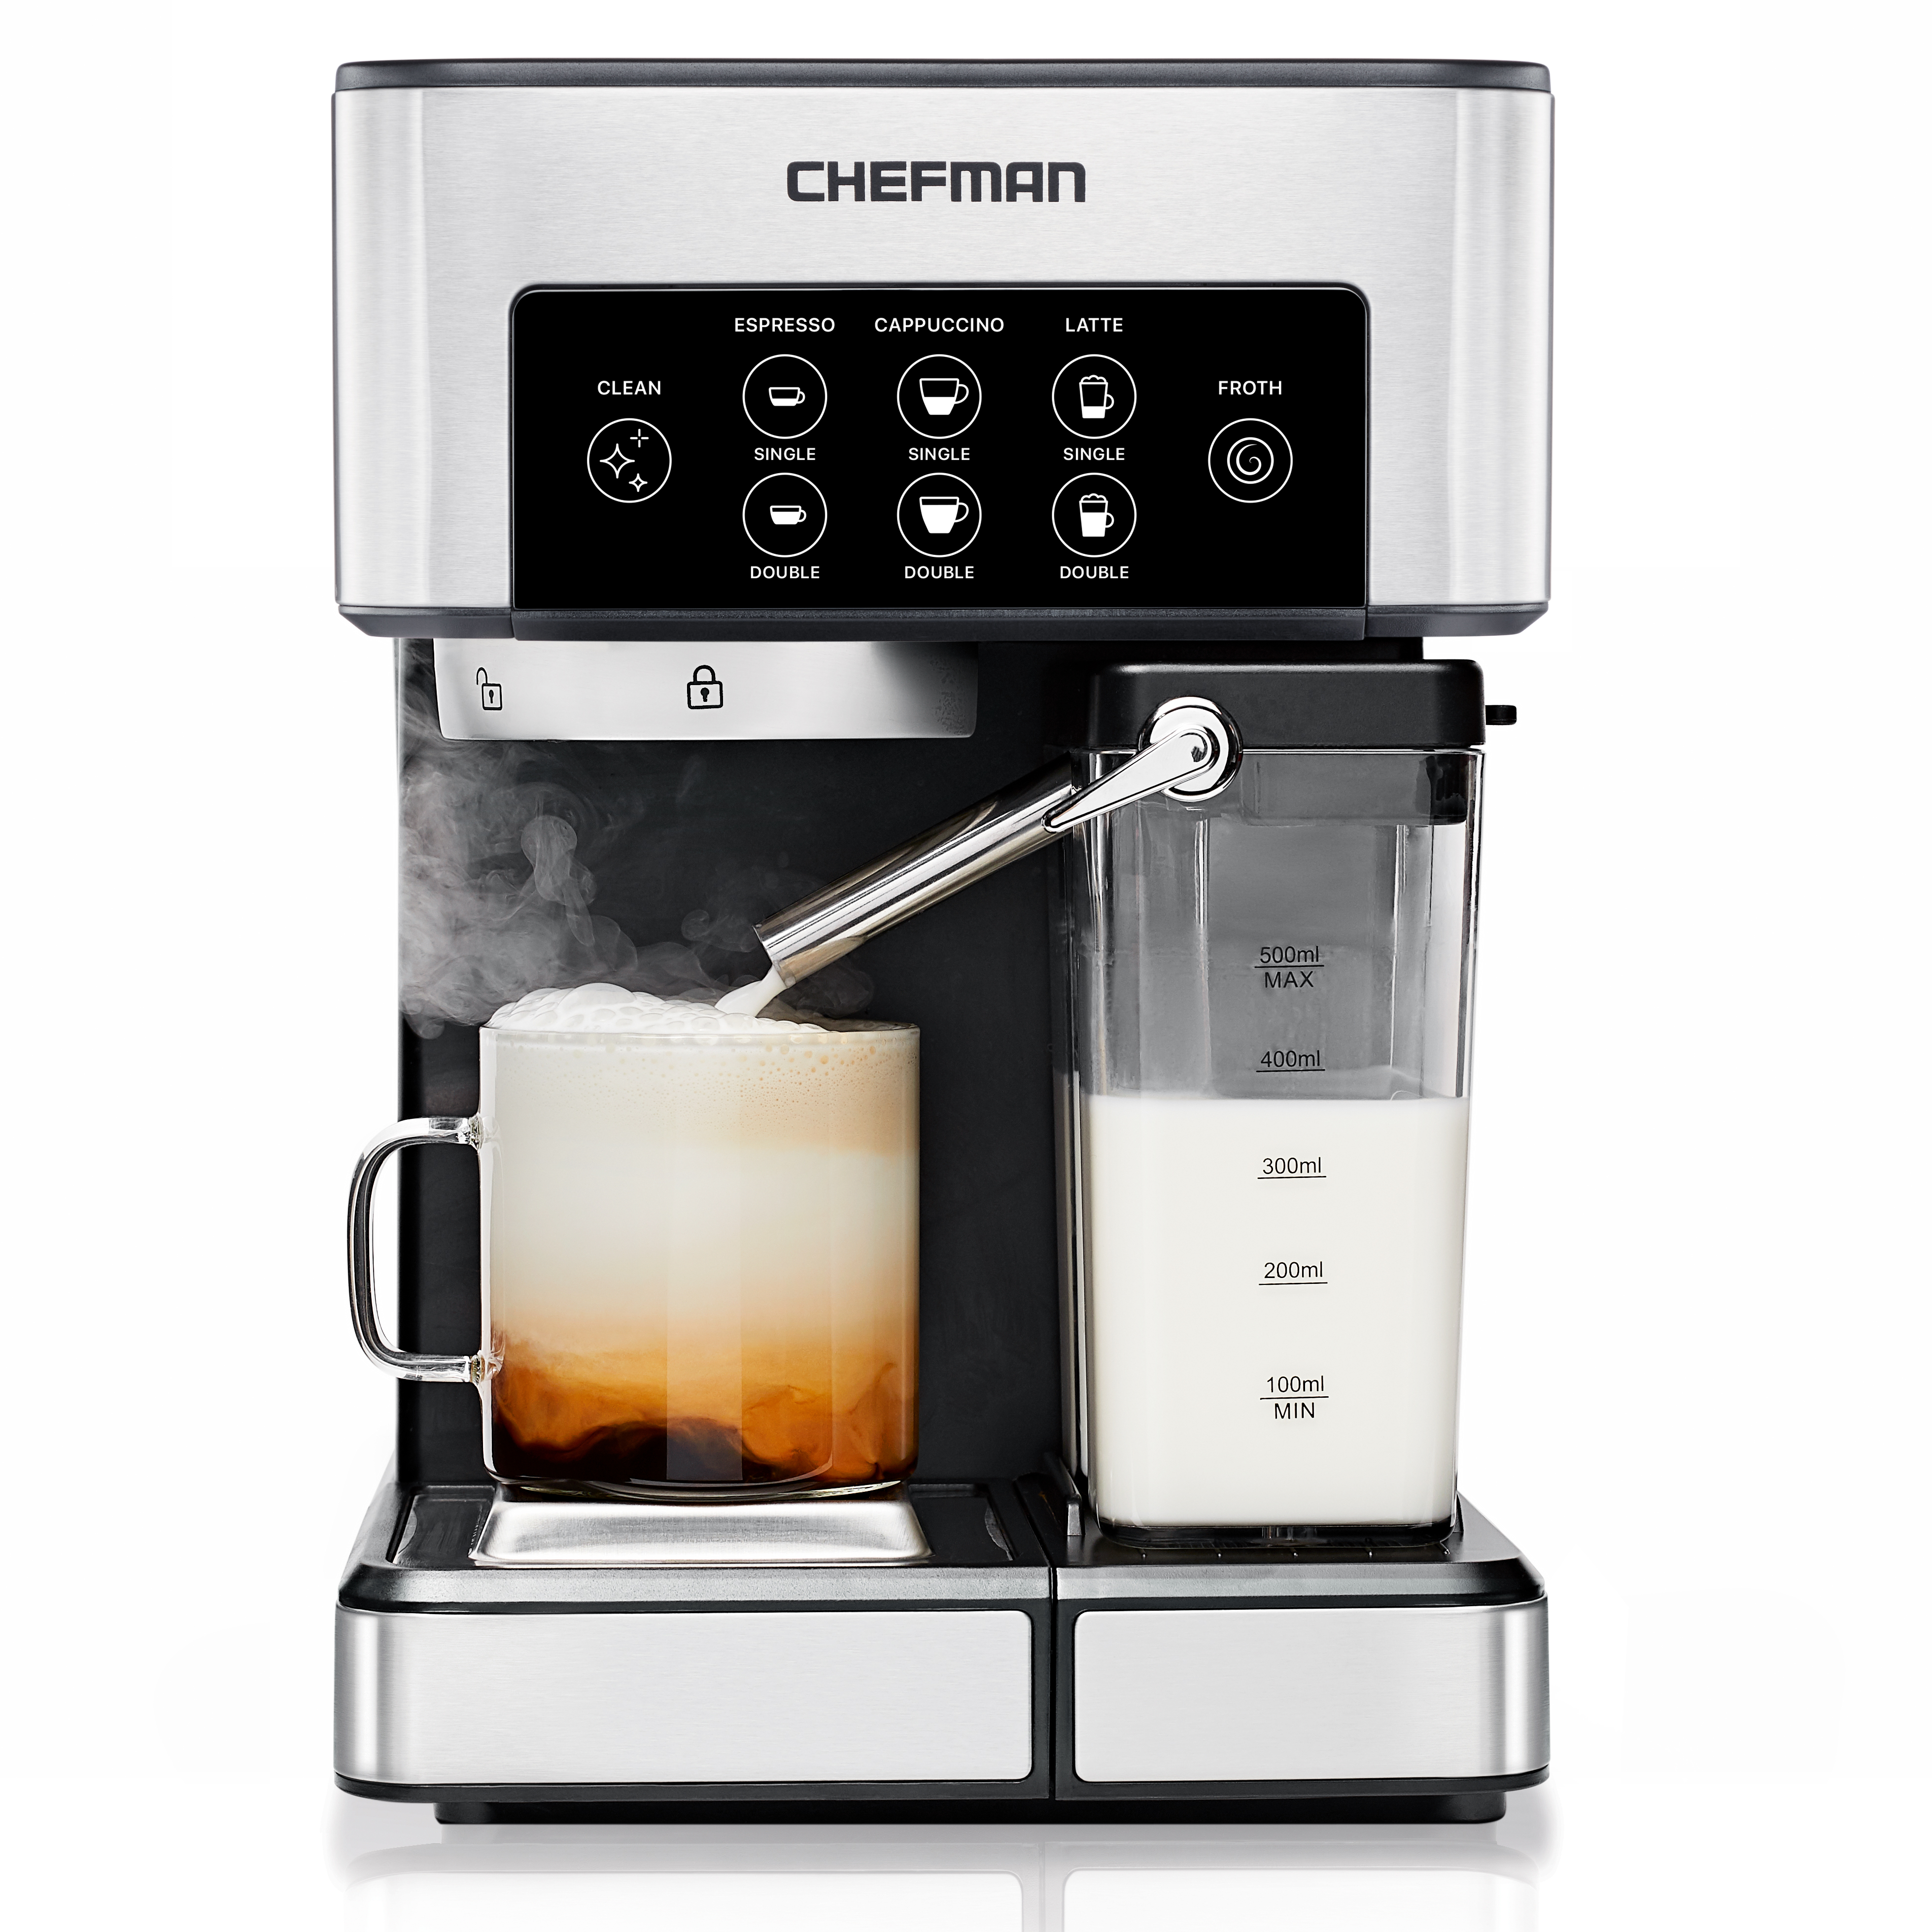 Chefman Barista Pro 6-in-1 Espresso Machine with Milk Frother, 15-BAR Pump, 1.8L Water Reservoir, Stainless Steel - image 1 of 8